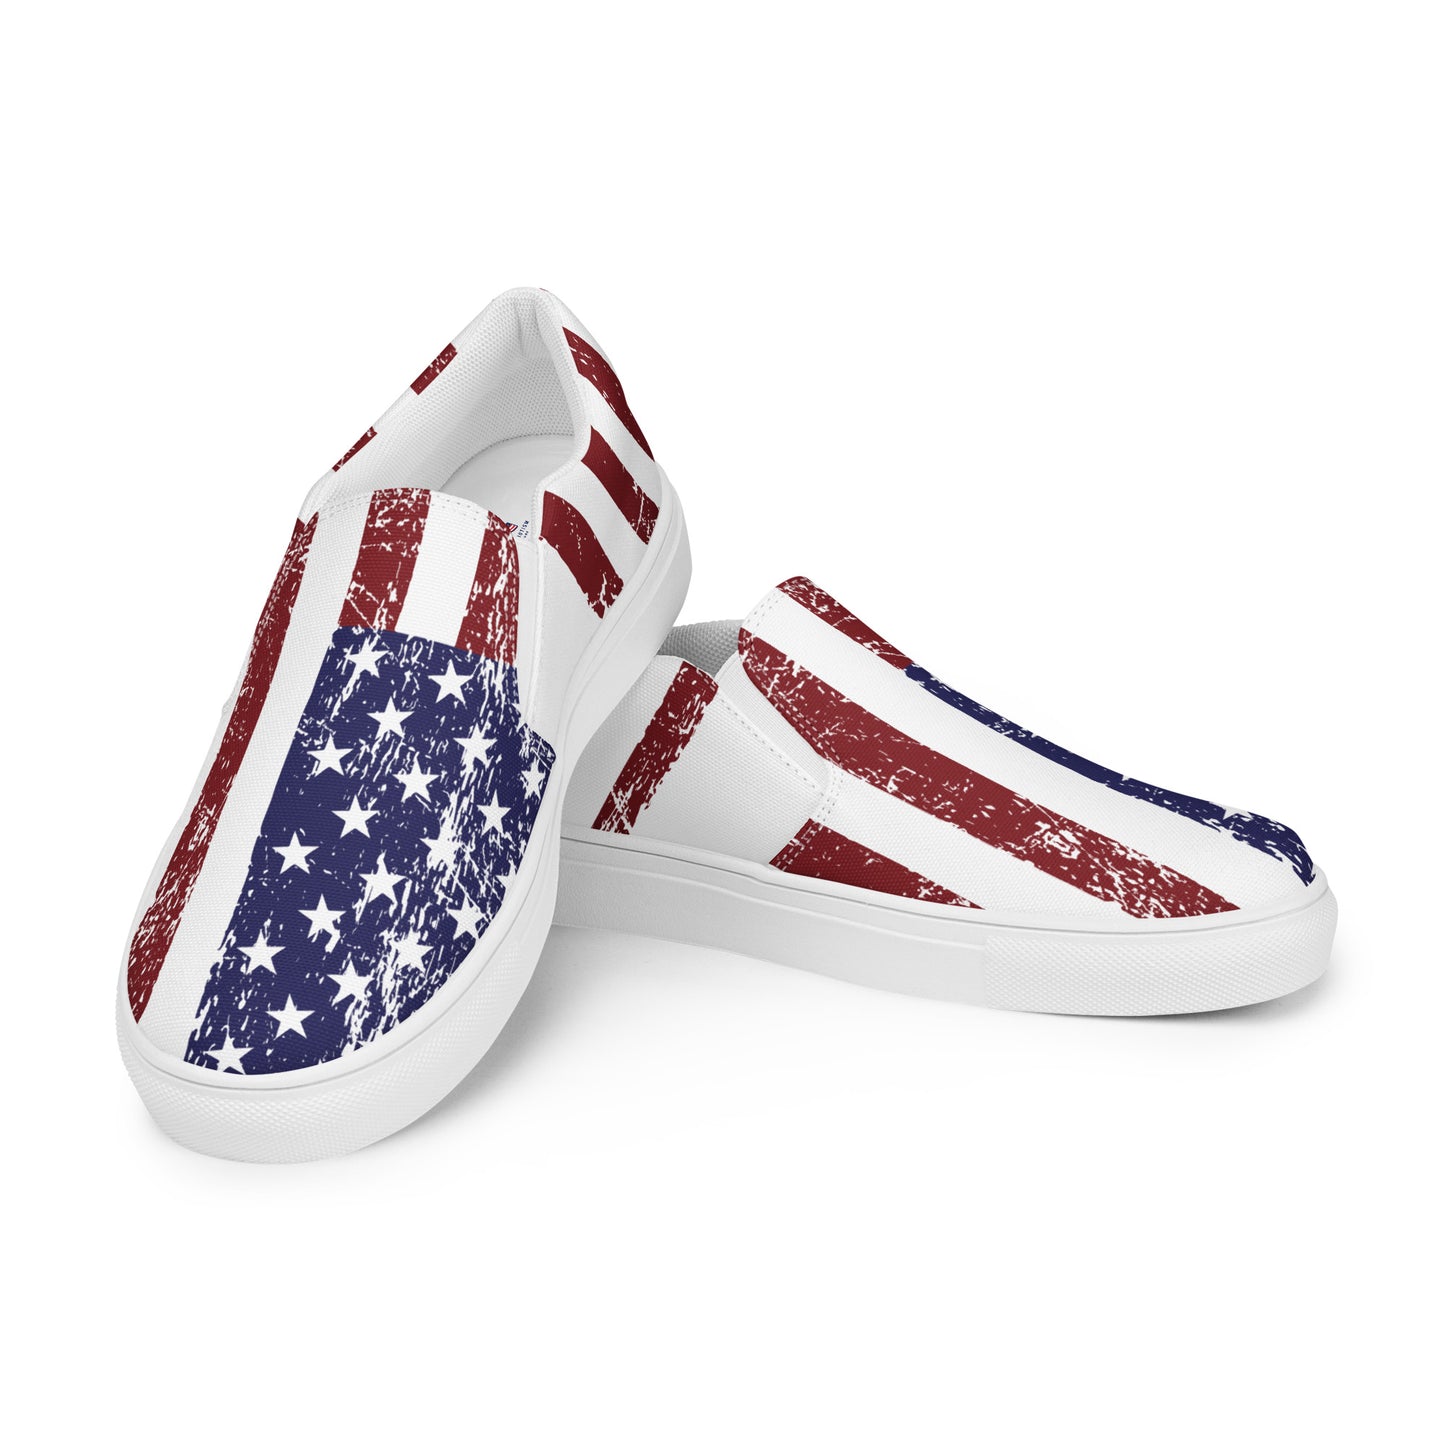 Women's USA Flag Slide-On Canvas Shoes